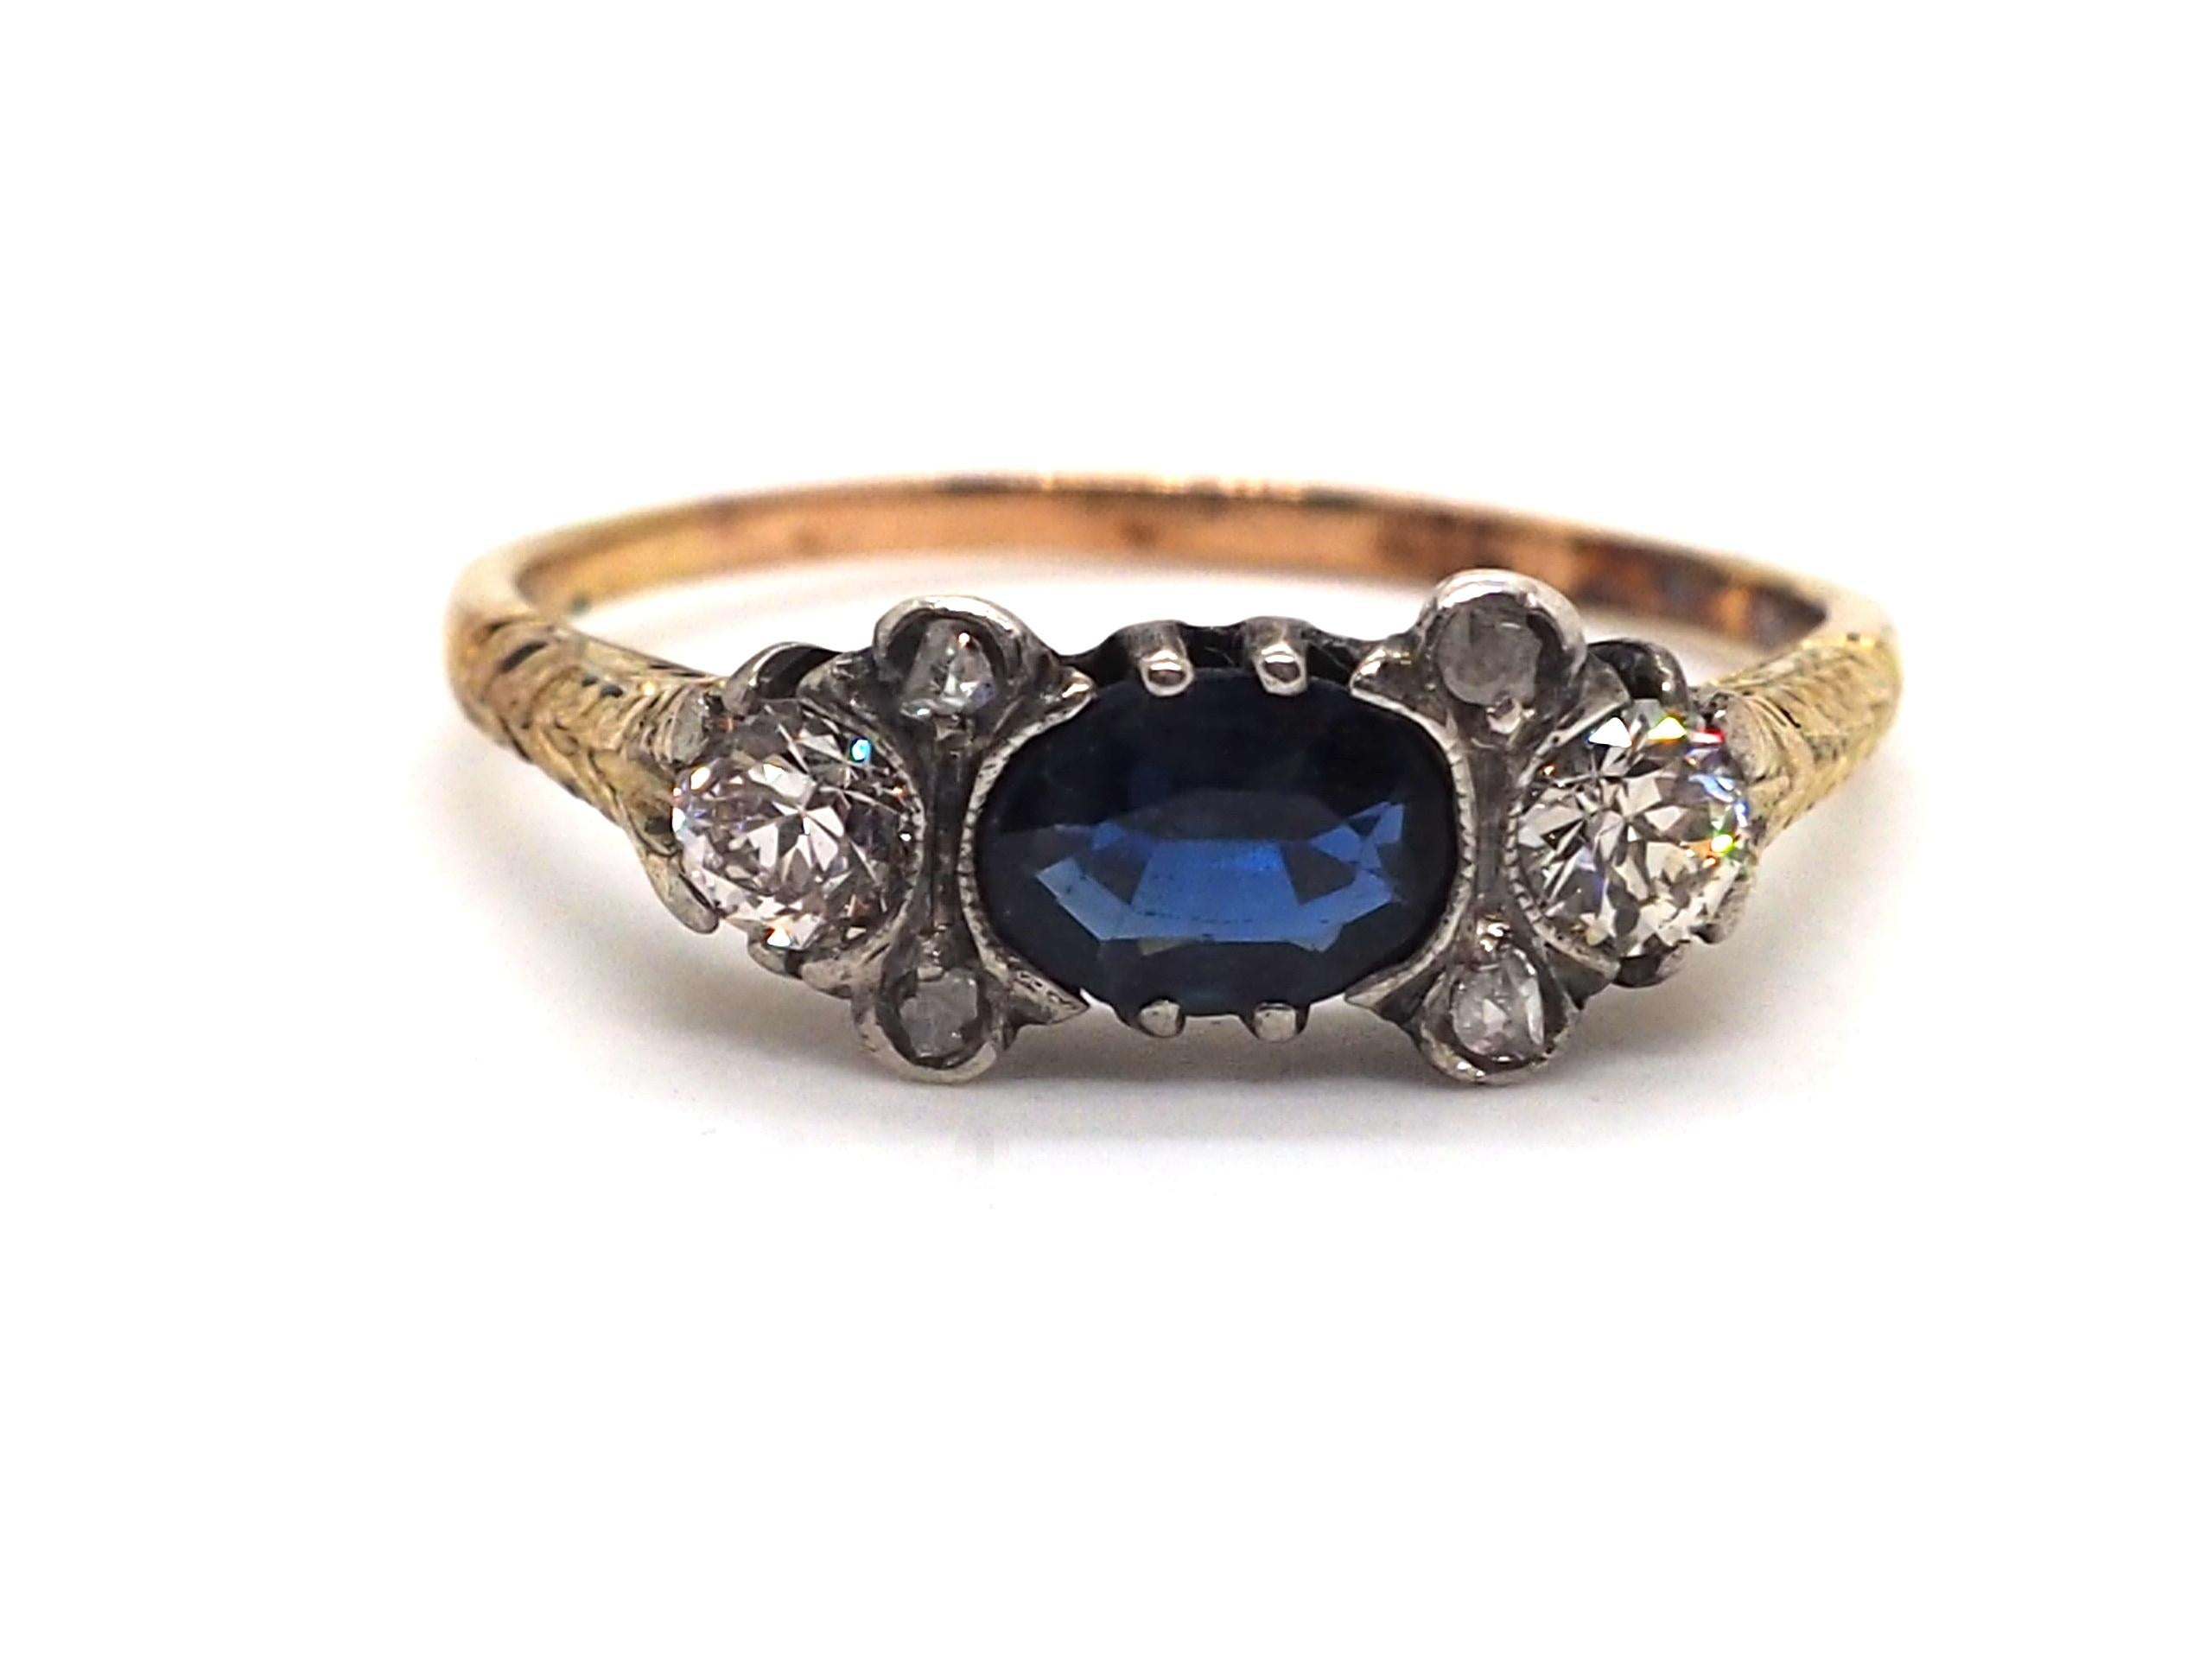 Vintage timeless ring crafted in 14K yellow gold decorated with a oval shape sapphire and 6 diamonds with total weight 0,46 carat

EU size: 61
US size: 9.75

Total weight: 3 grams

All our pieces have been carefully chosen, restored and prepared for